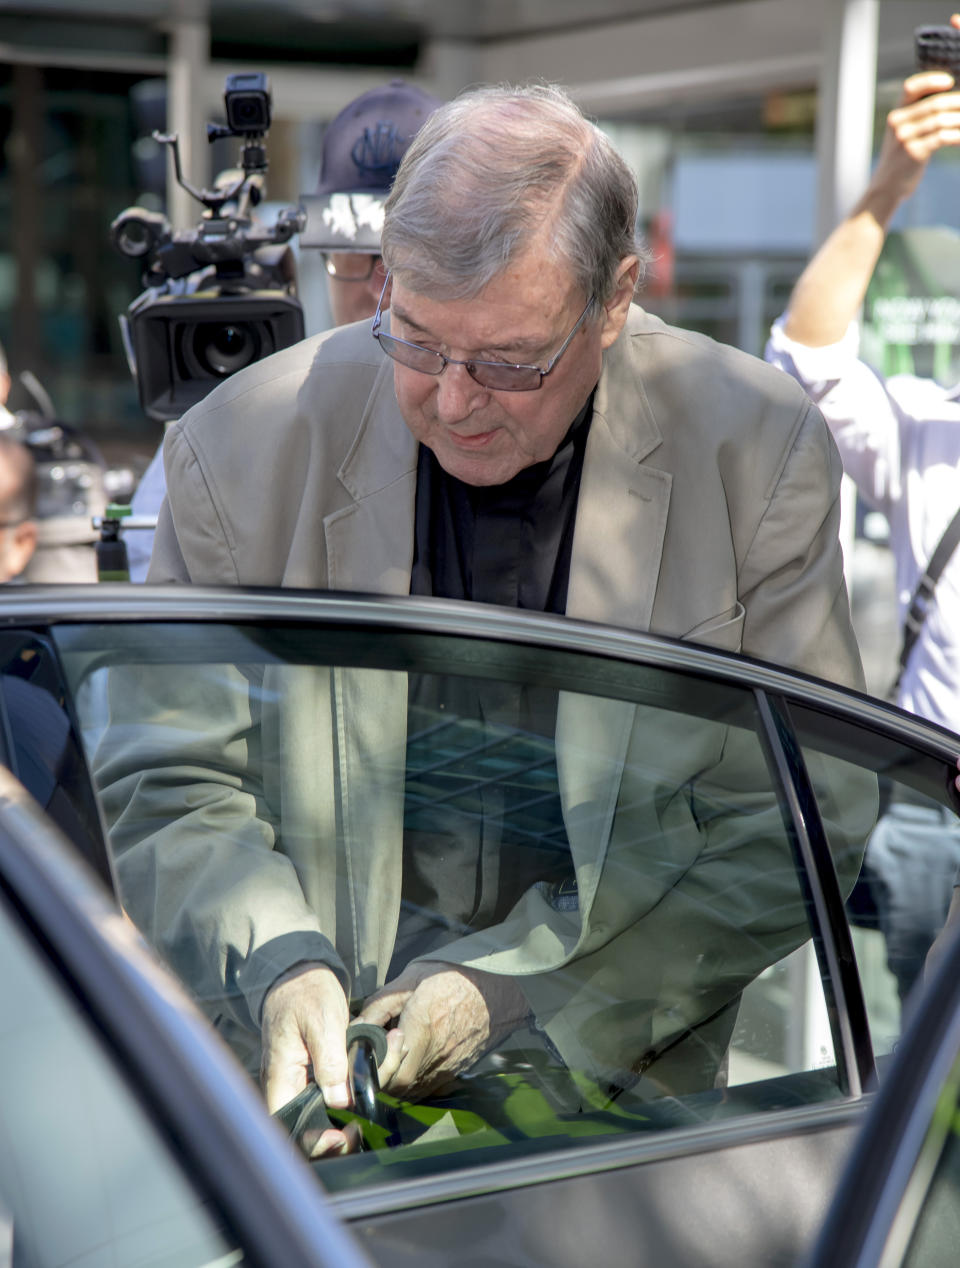 In this Friday, Feb. 22, 2019, photo, Cardinal George Pell leaves the County Court in Melbourne, Australia. The most senior Catholic cleric ever charged with child sex abuse has been convicted on Tuesday, Feb. 26, 2019 of molesting two choirboys moments after celebrating Mass, dealing a new blow to the Catholic hierarchy's credibility after a year of global revelations of abuse and cover-up. (AP Photo/Andy Brownbill)